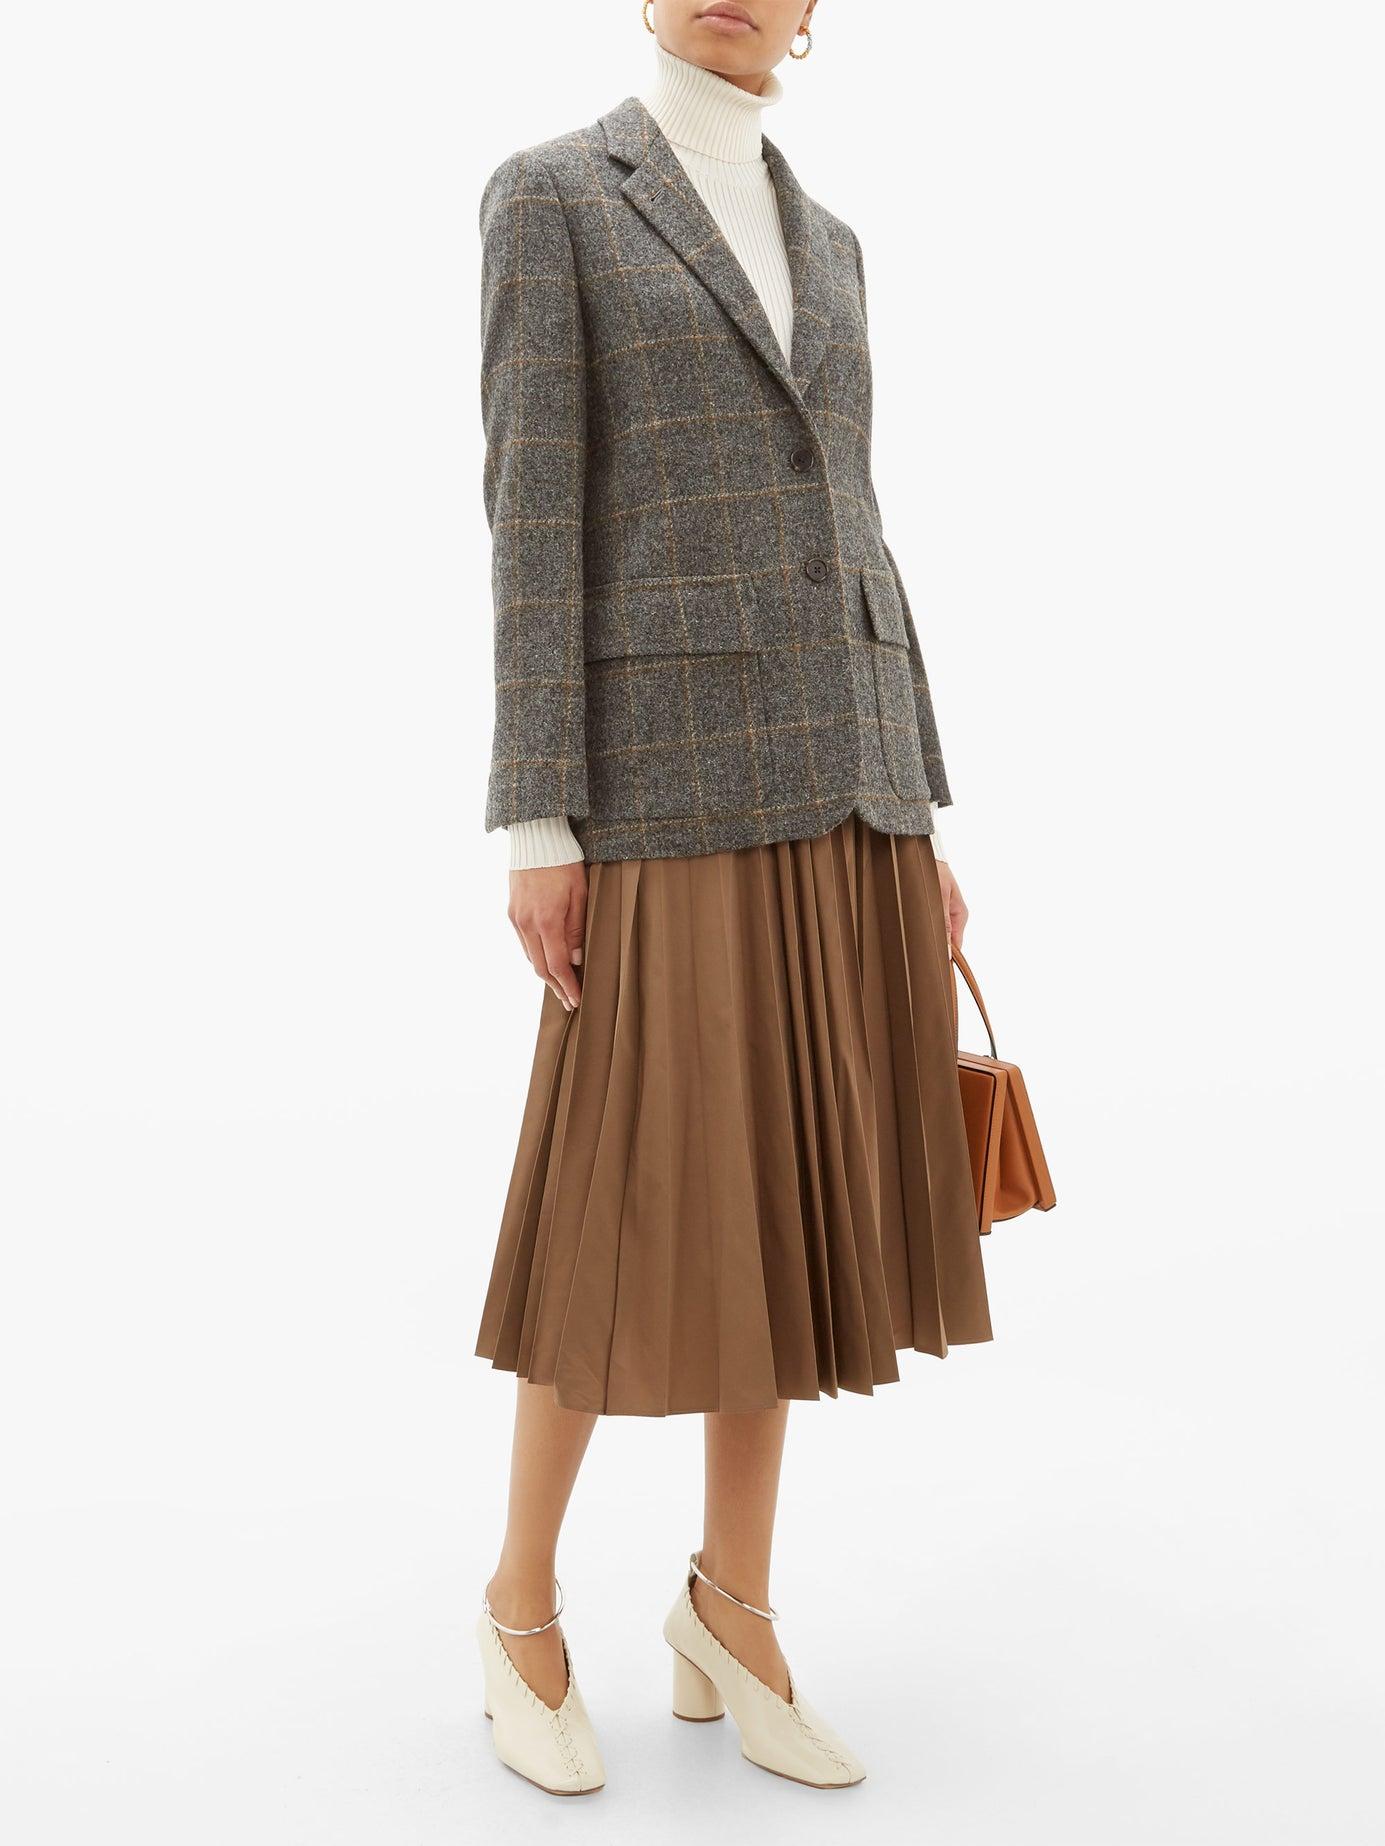 Margaret Howell Single-breasted Windowpane-check Wool Jacket in Gray - Lyst